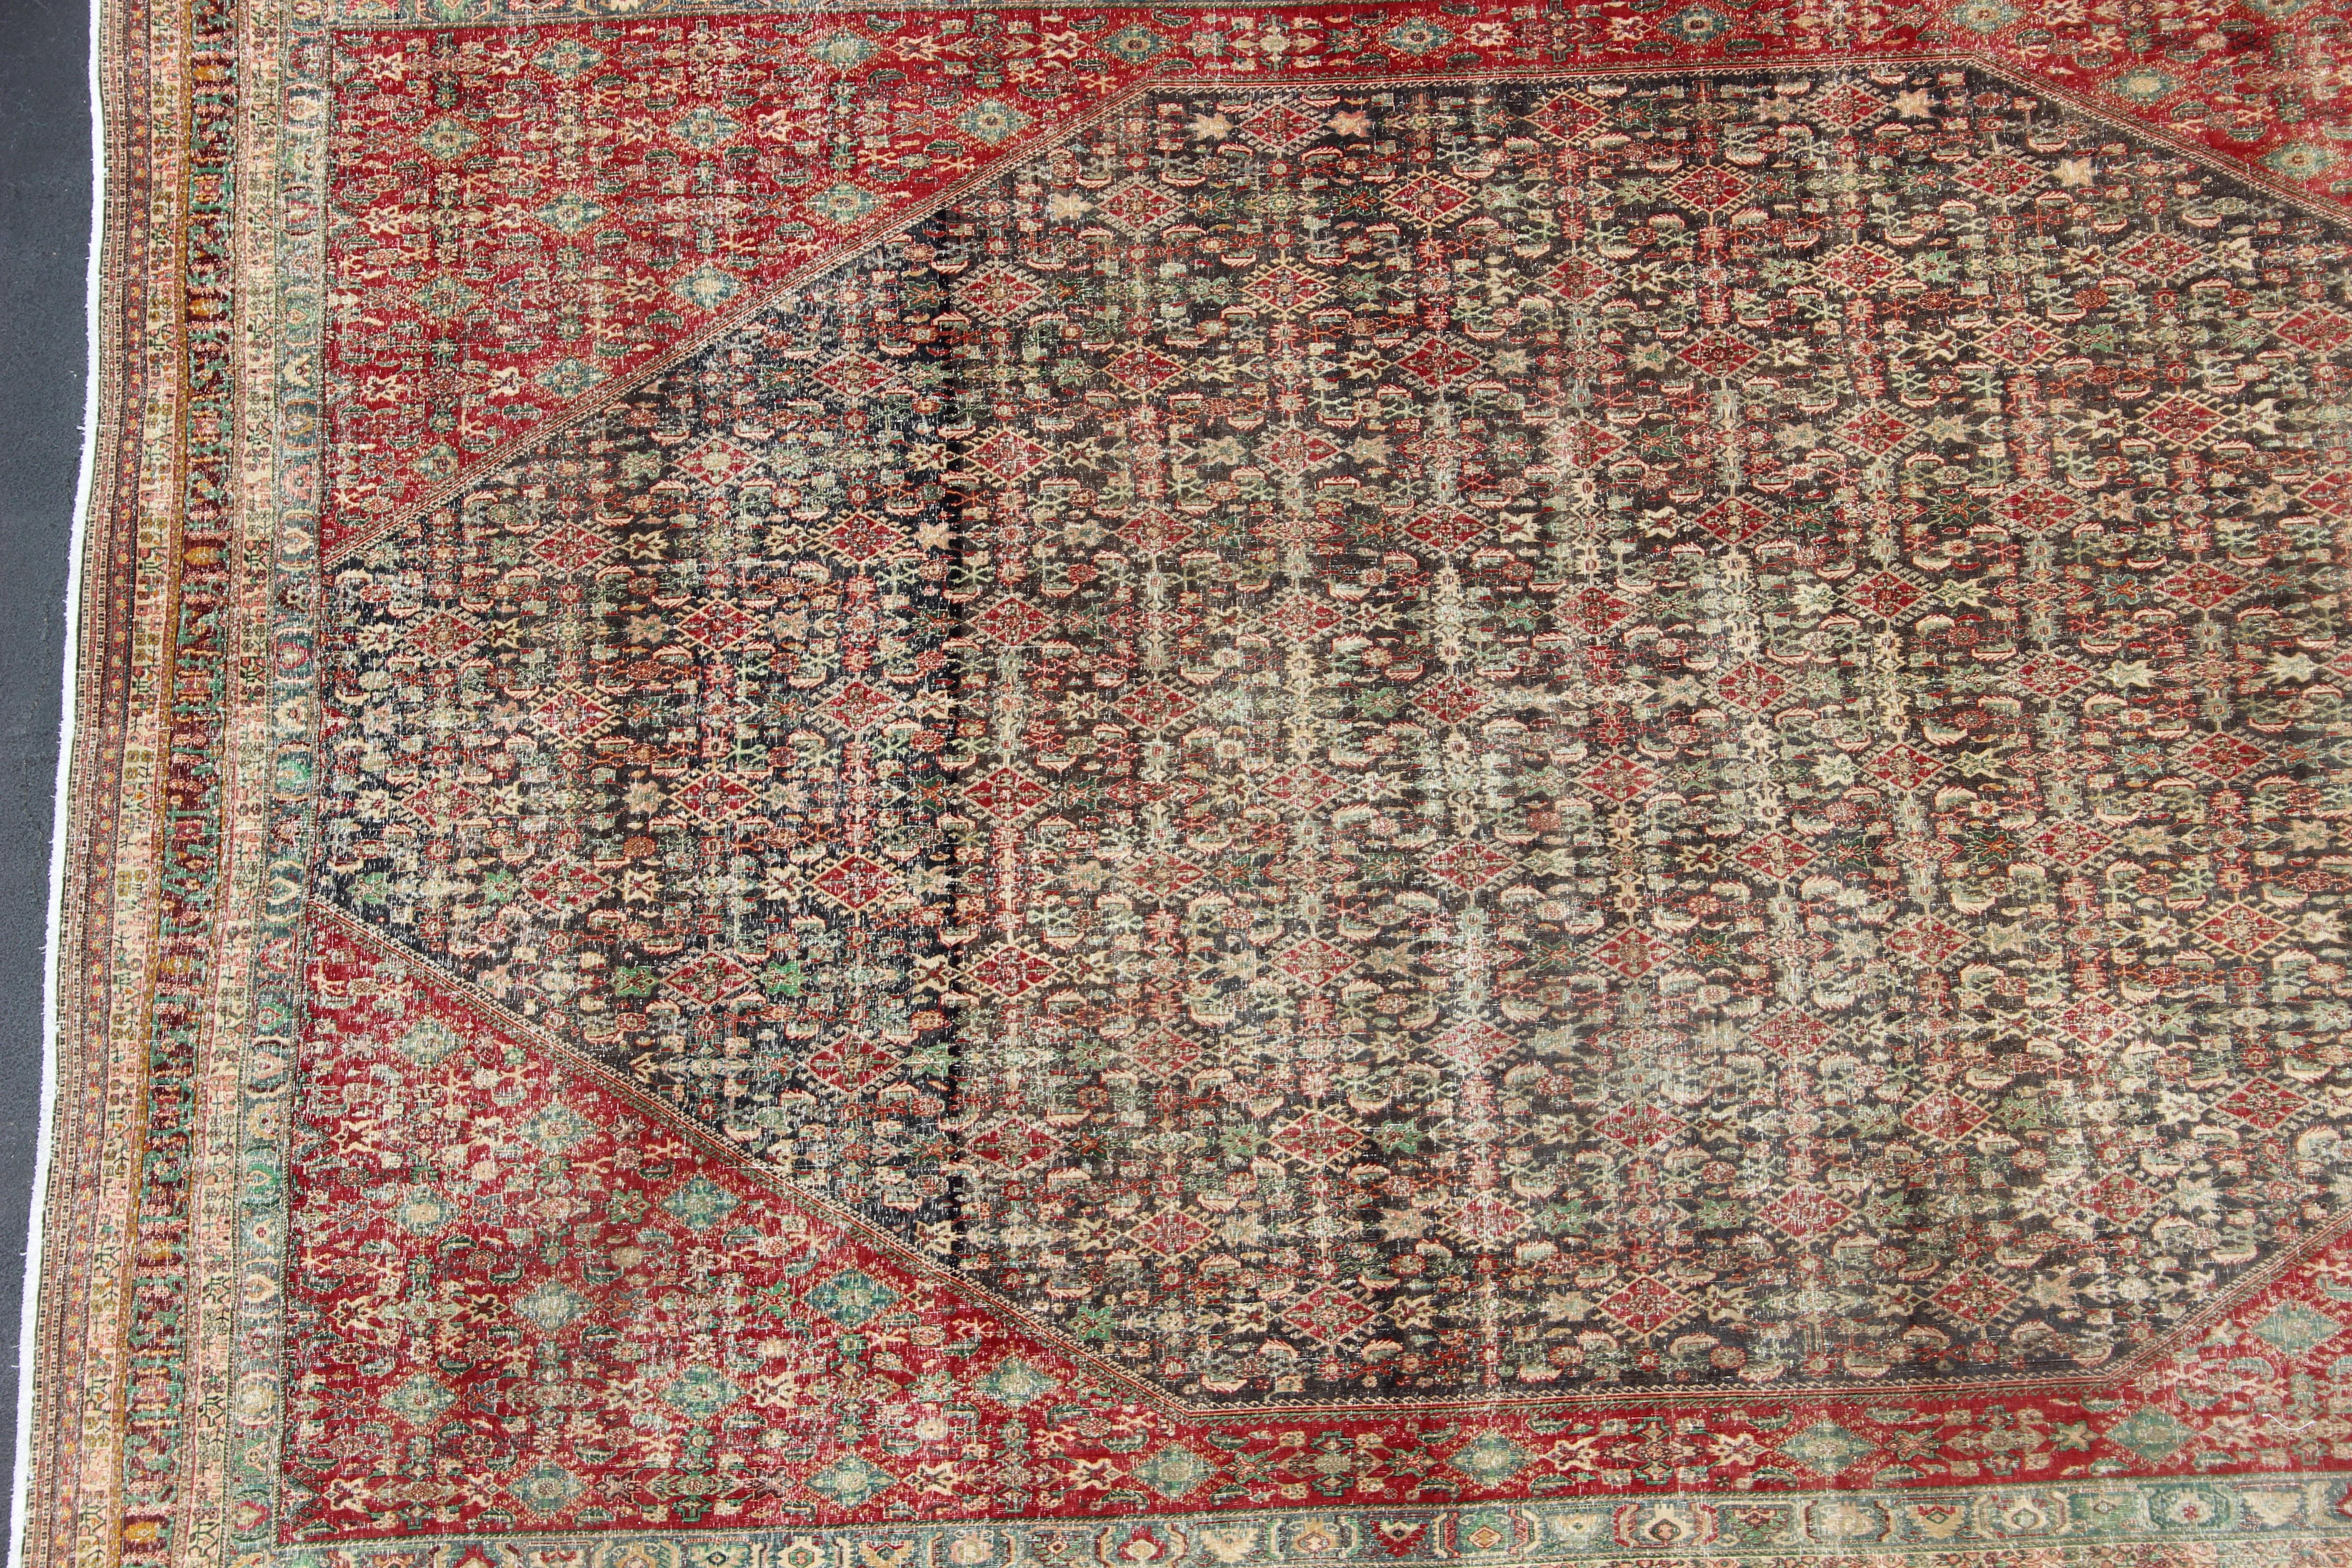 Early 20th Century Colorful Large Persian Antique Qashqai rug with A Beautiful Tribal Motif Design For Sale